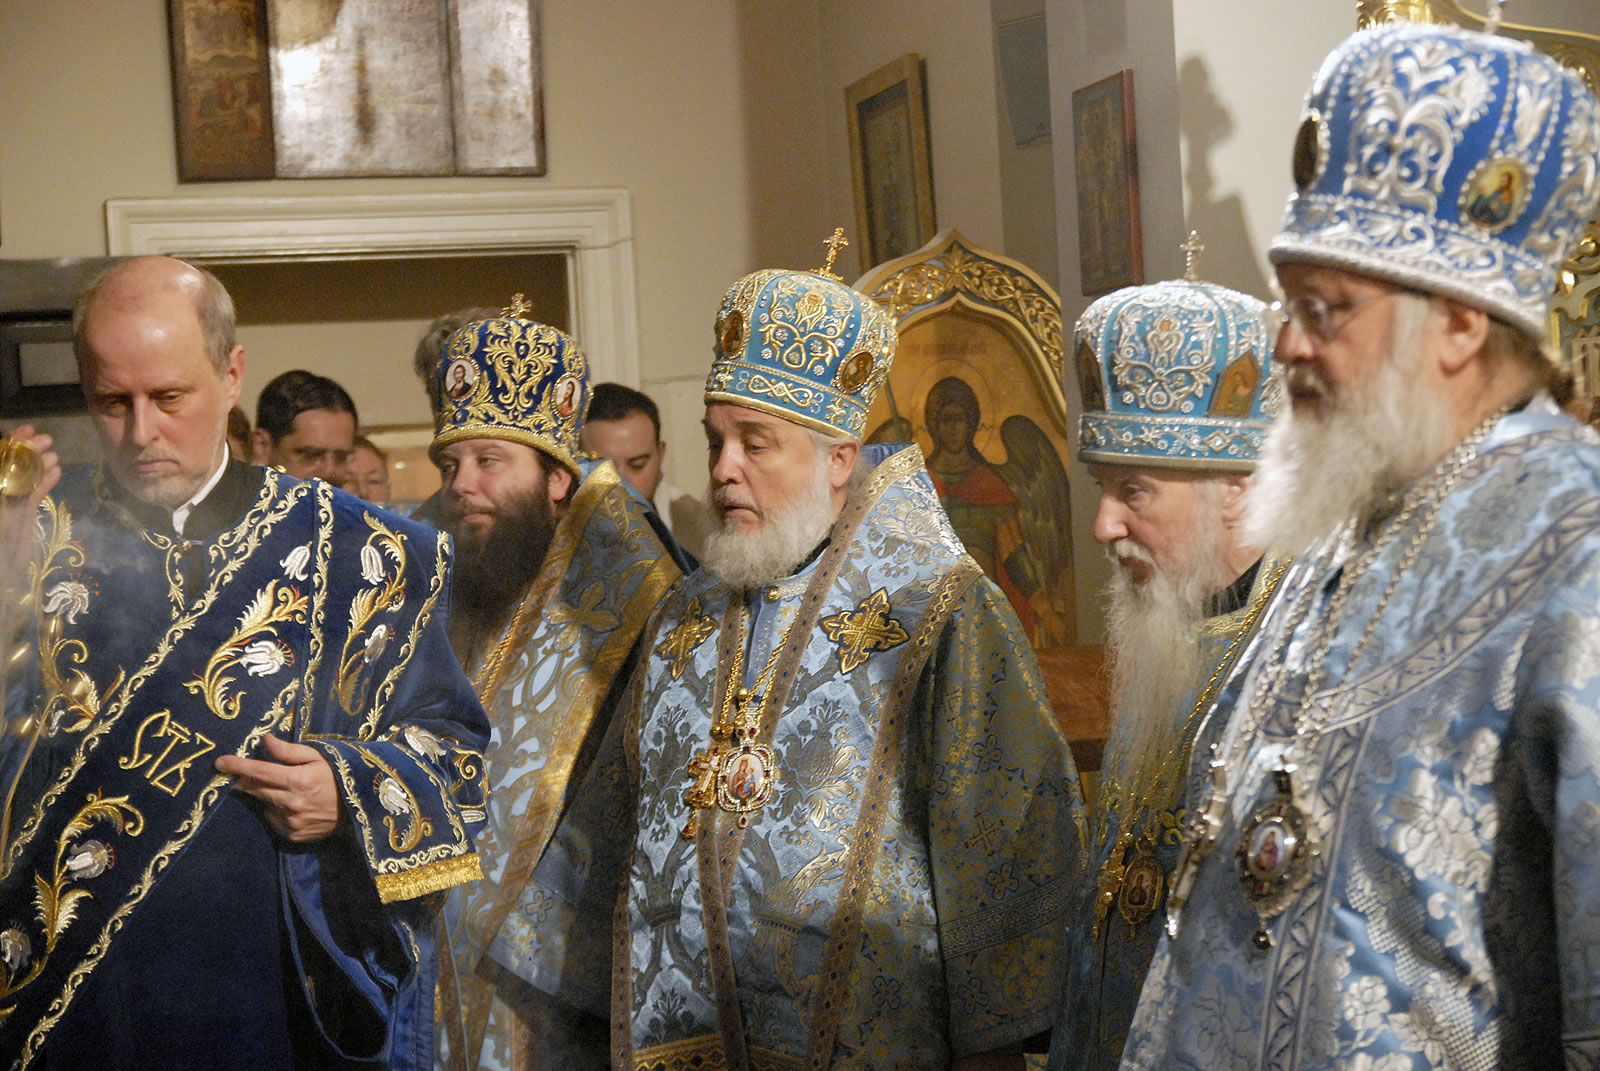 ROCOR Synod of Bishops Concludes Its Final Session of the Year